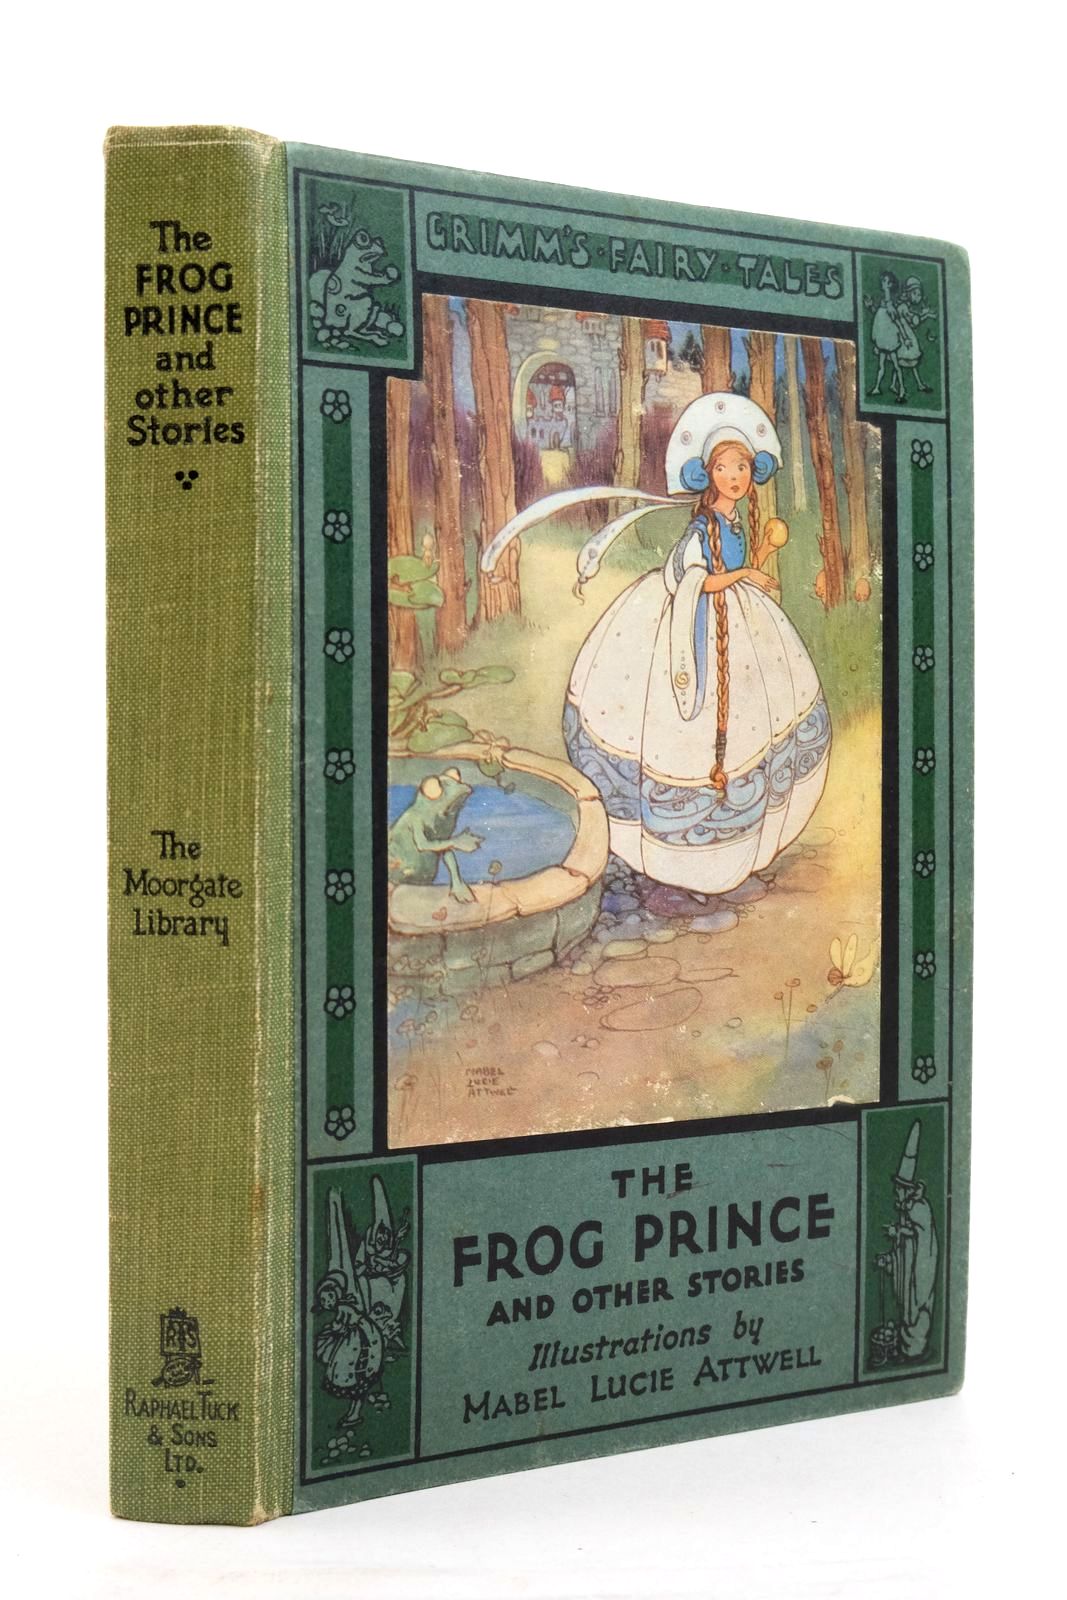 Photo of THE FROG PRINCE AND OTHER STORIES written by Grimm, Brothers illustrated by Attwell, Mabel Lucie published by Raphael Tuck &amp; Sons Ltd. (STOCK CODE: 2137642)  for sale by Stella & Rose's Books